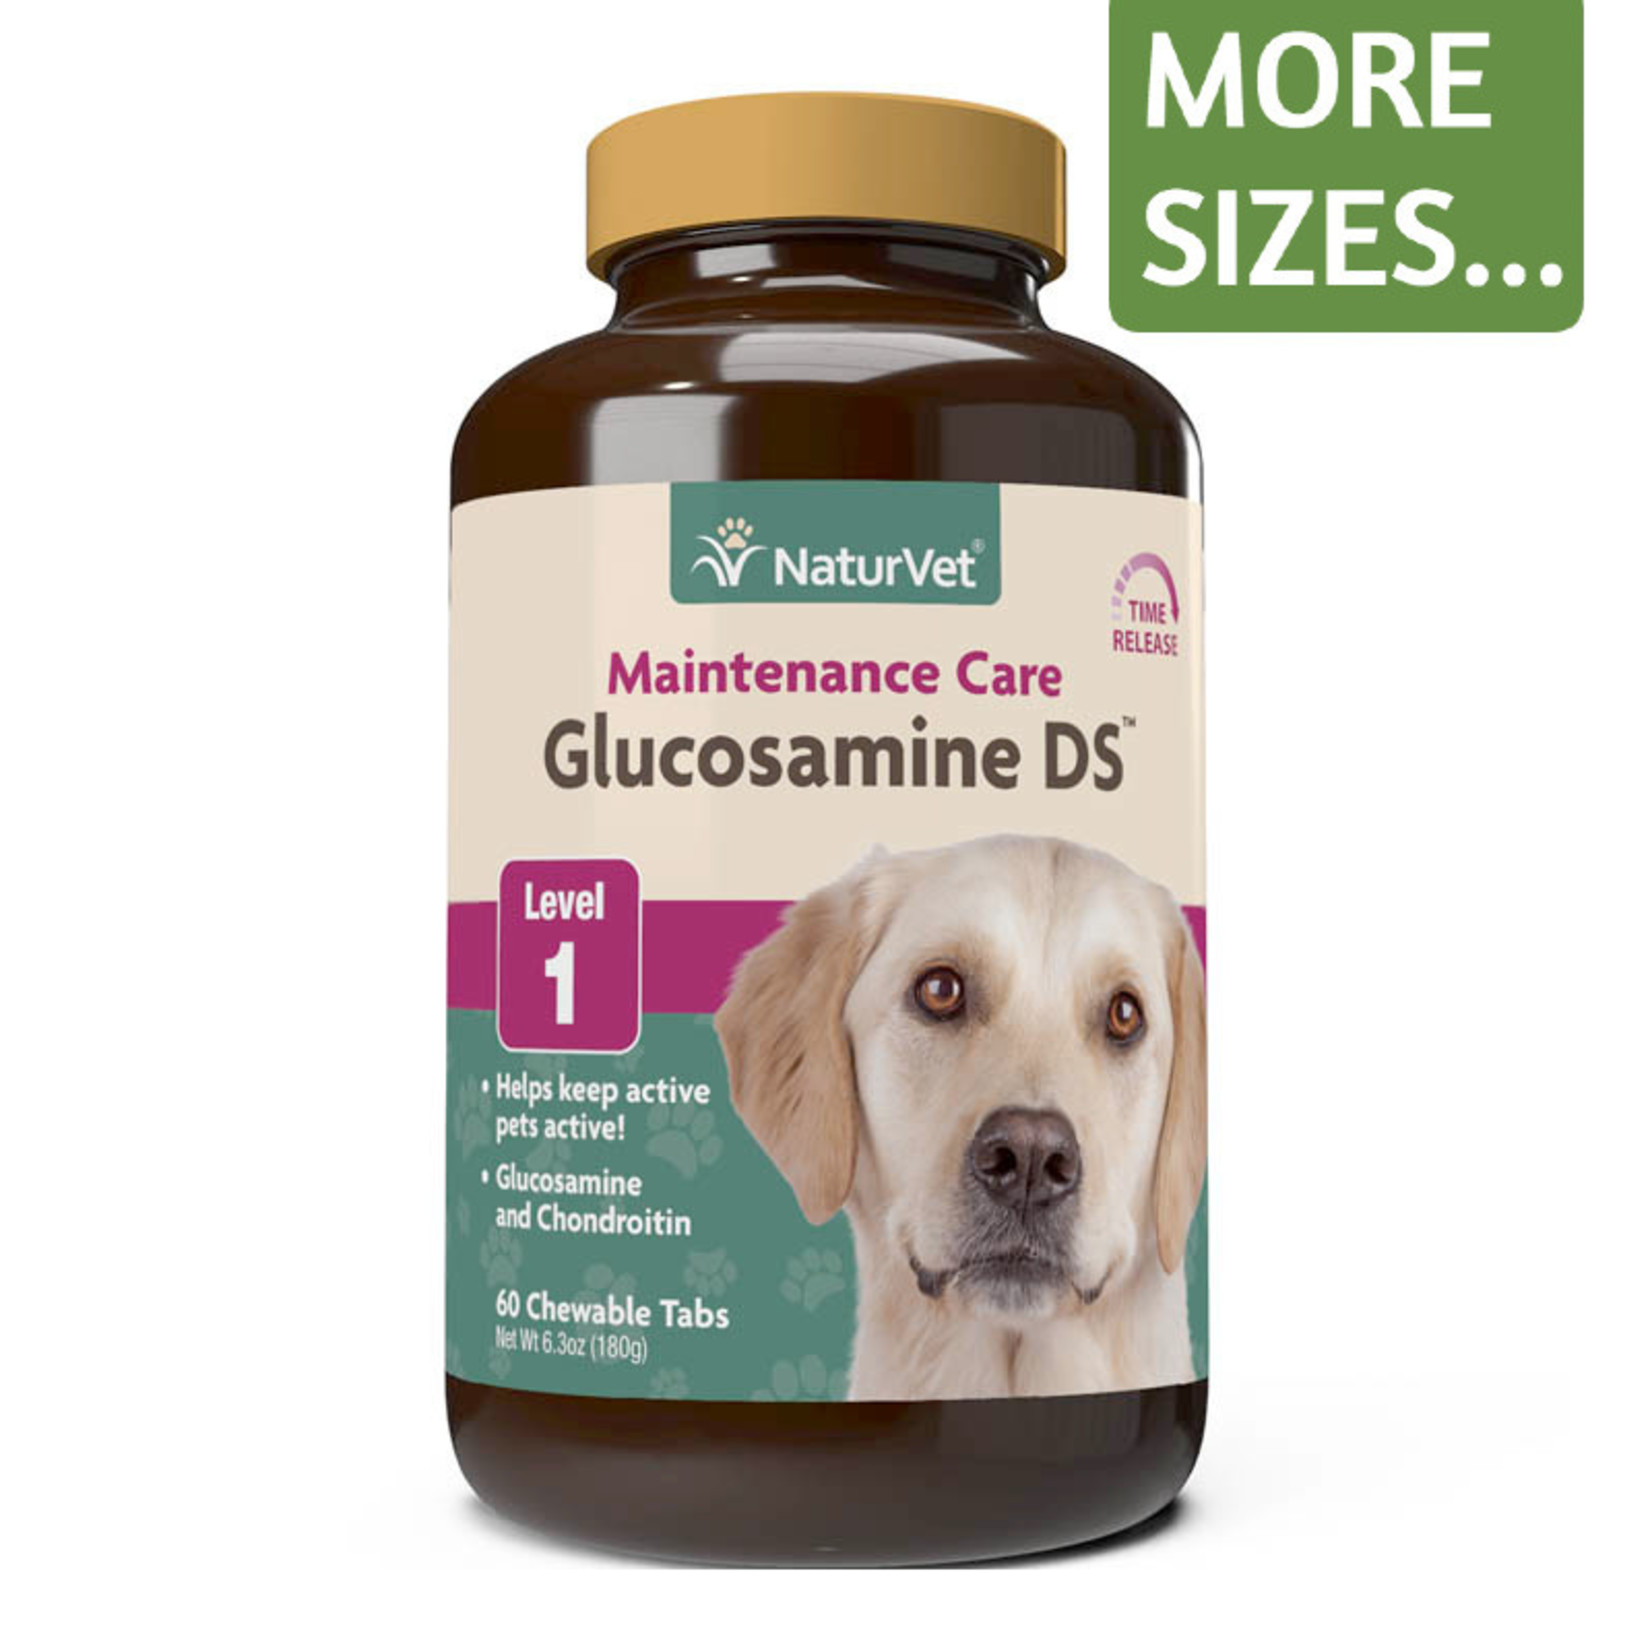 naturVet NaturVet Glucosamine DS Maintenance Care Level 1 Joint Health Chewable Tablets for Dogs and Cats - 60ct, 150ct